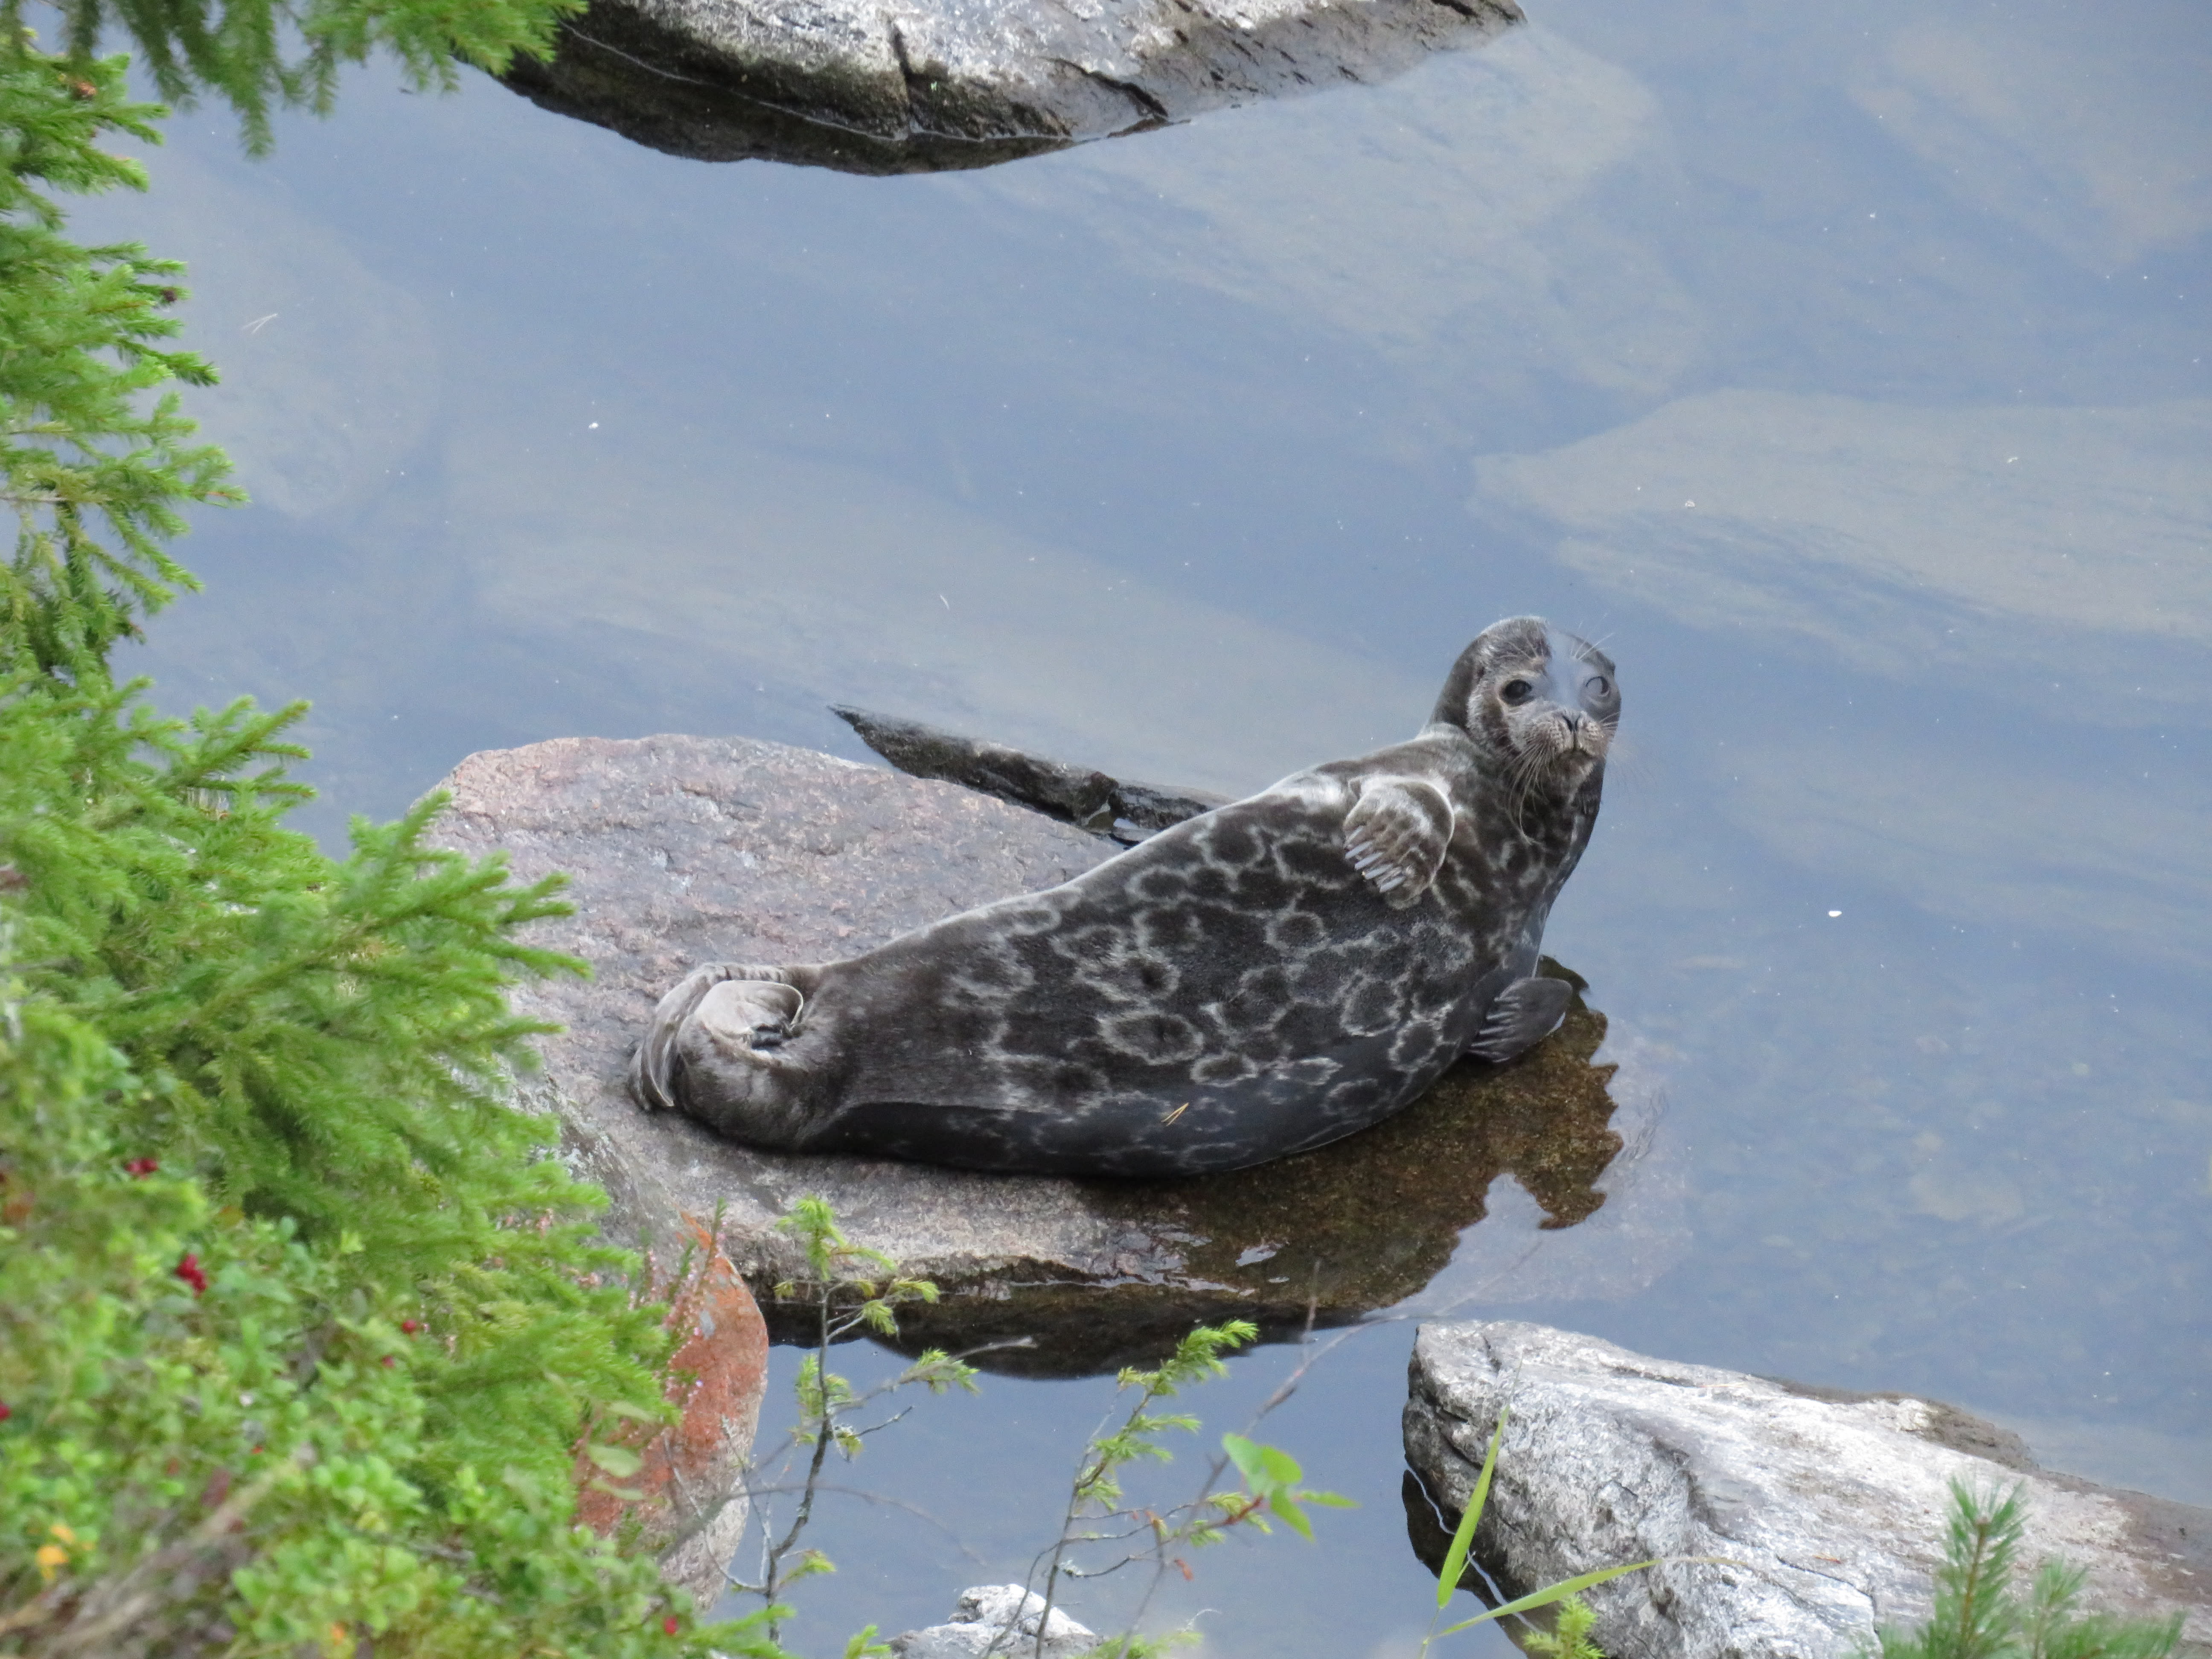 A record number of Saimaa seal pups were born this year, says the wildlife agency